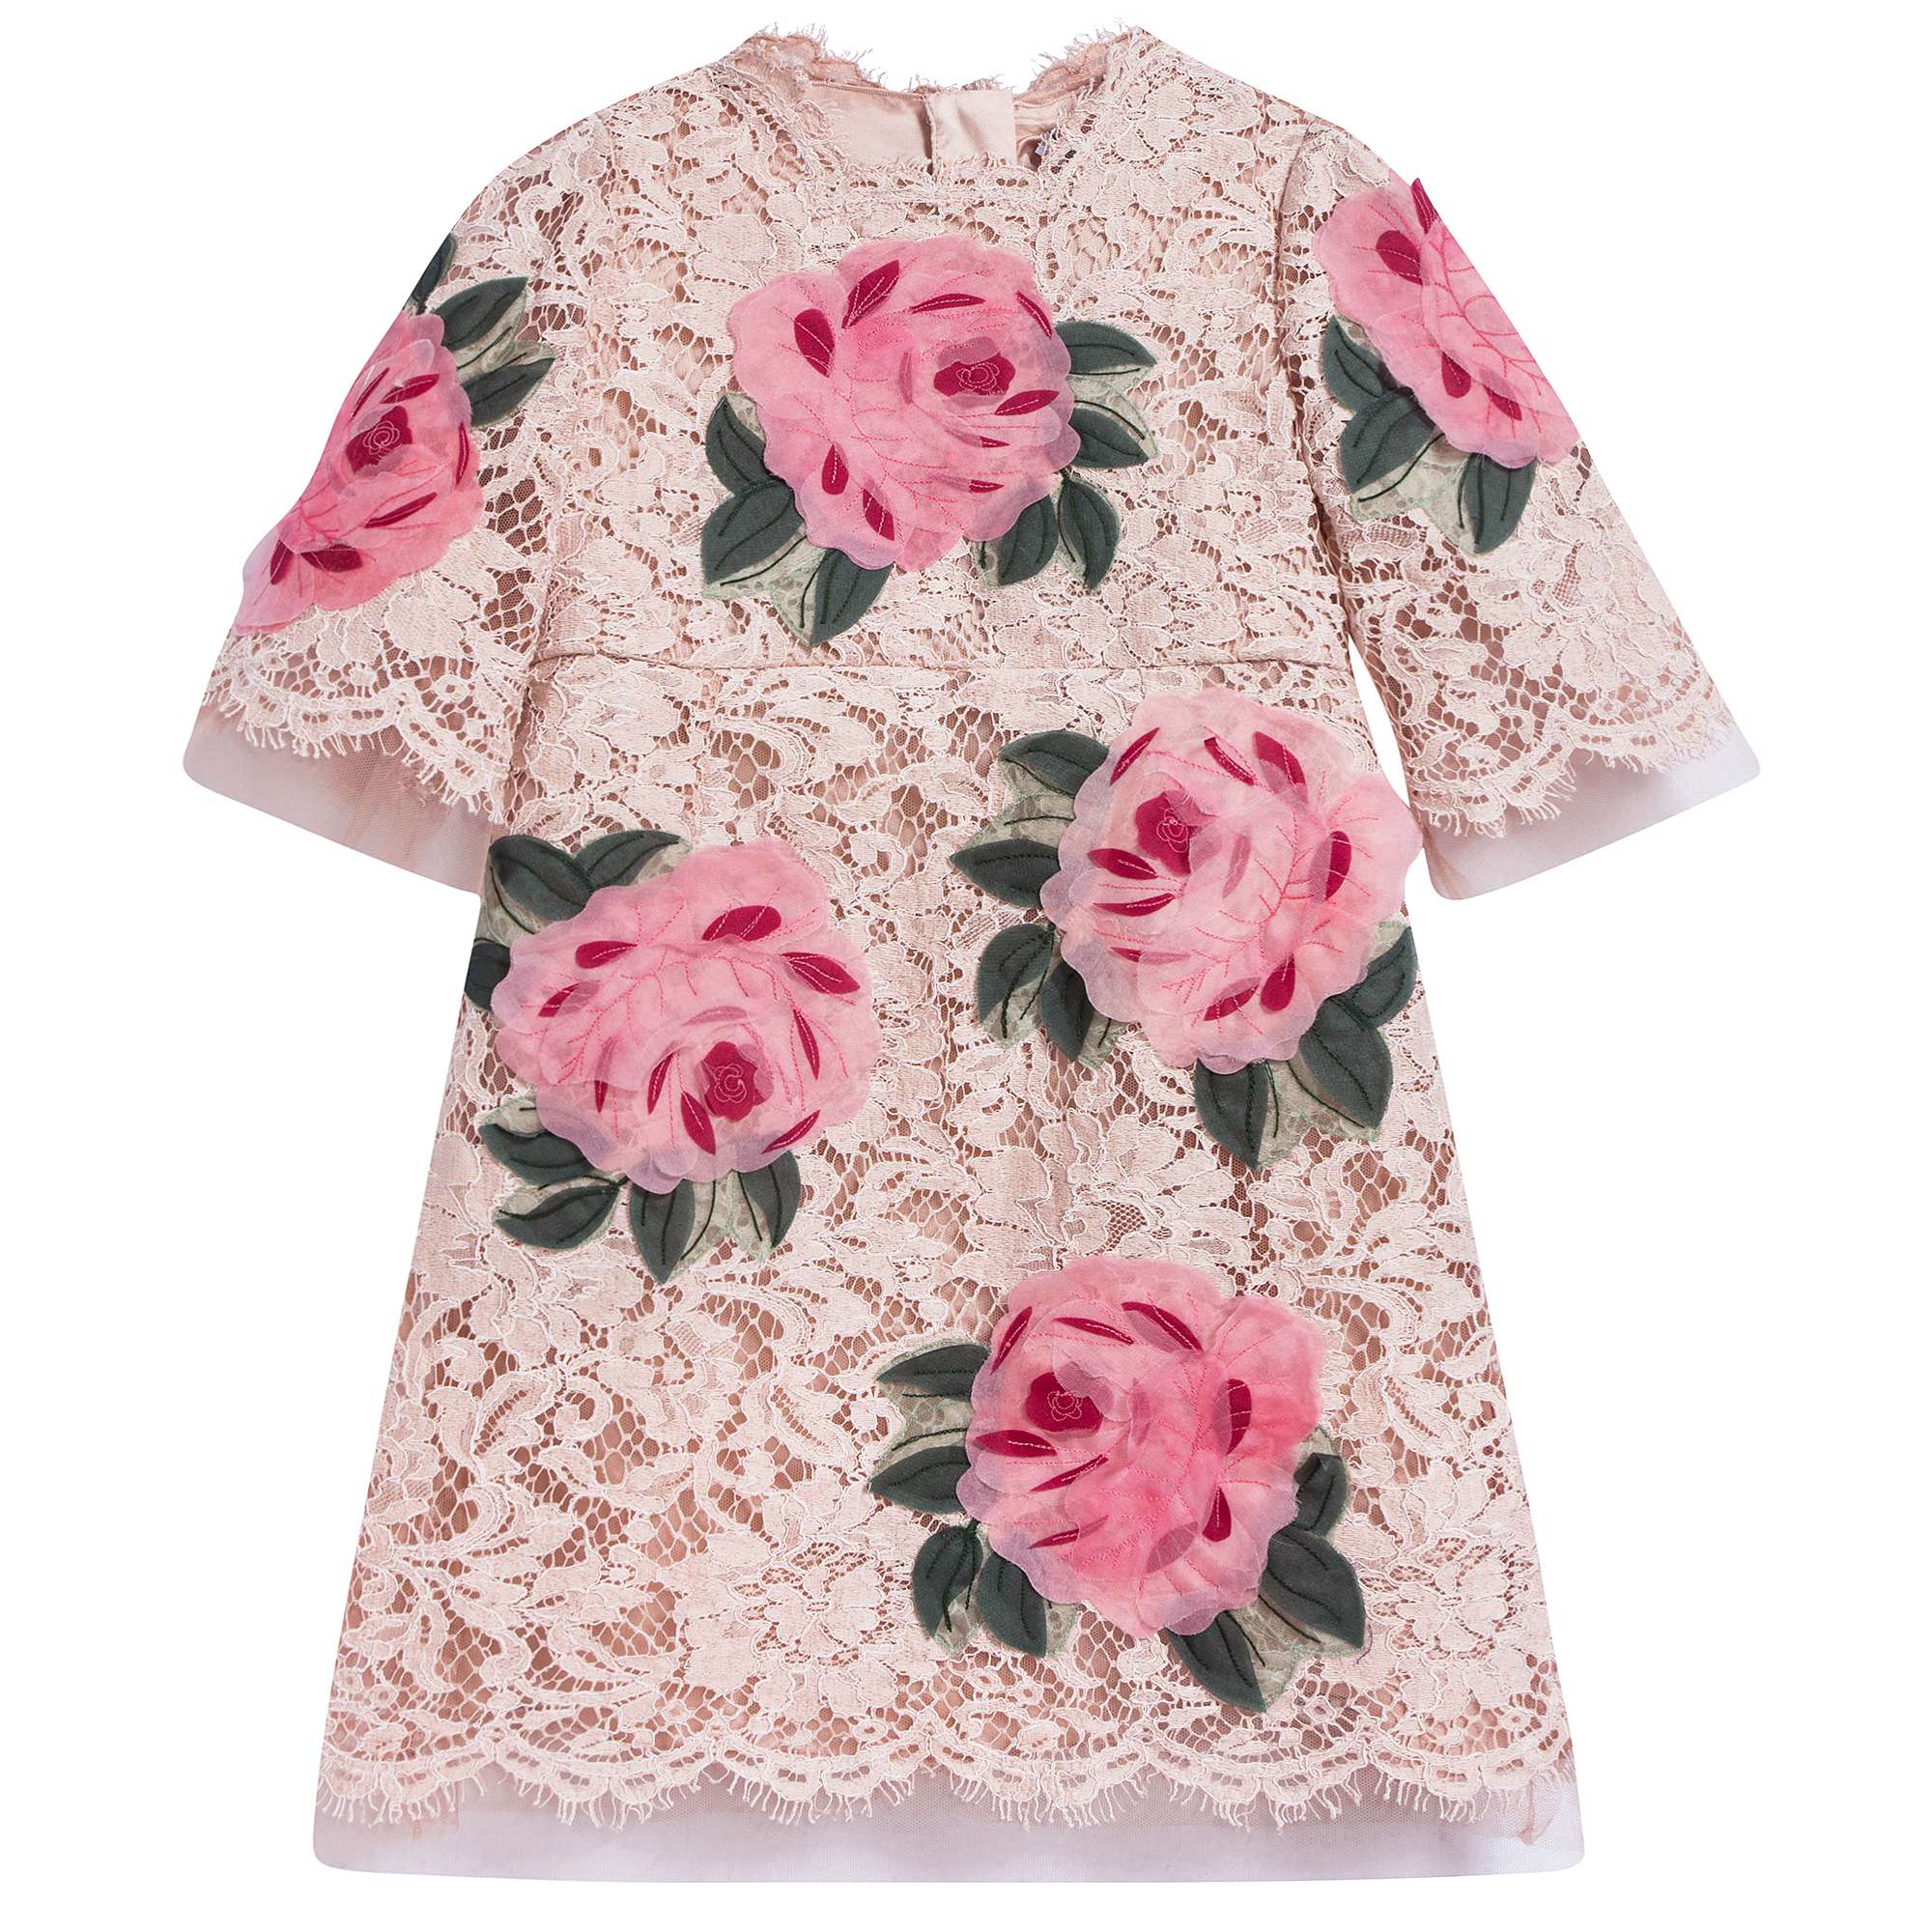 Girls Pink Roses Lace Dress